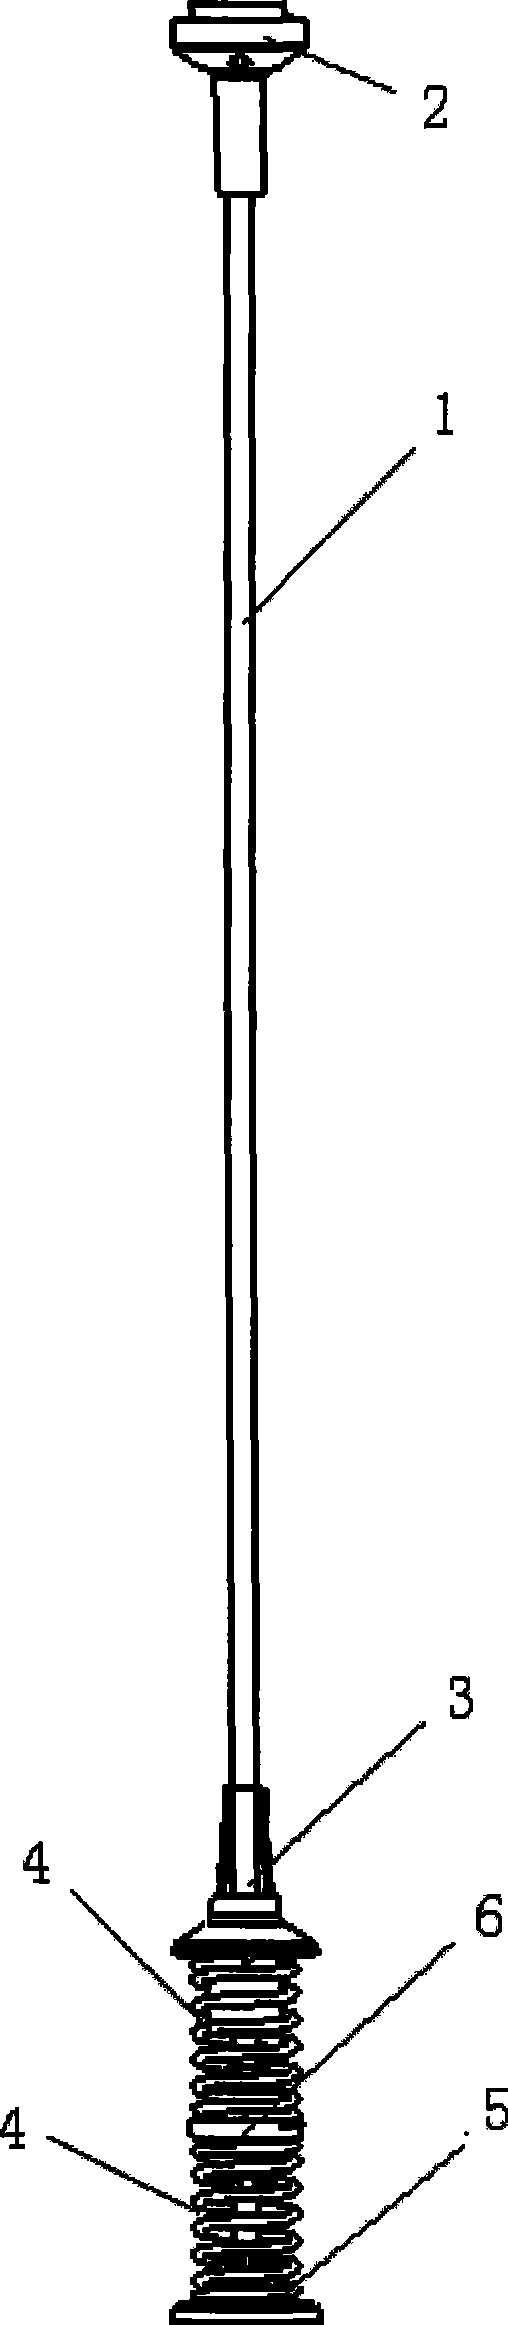 Shock-absorbing suspension rod of combined spring